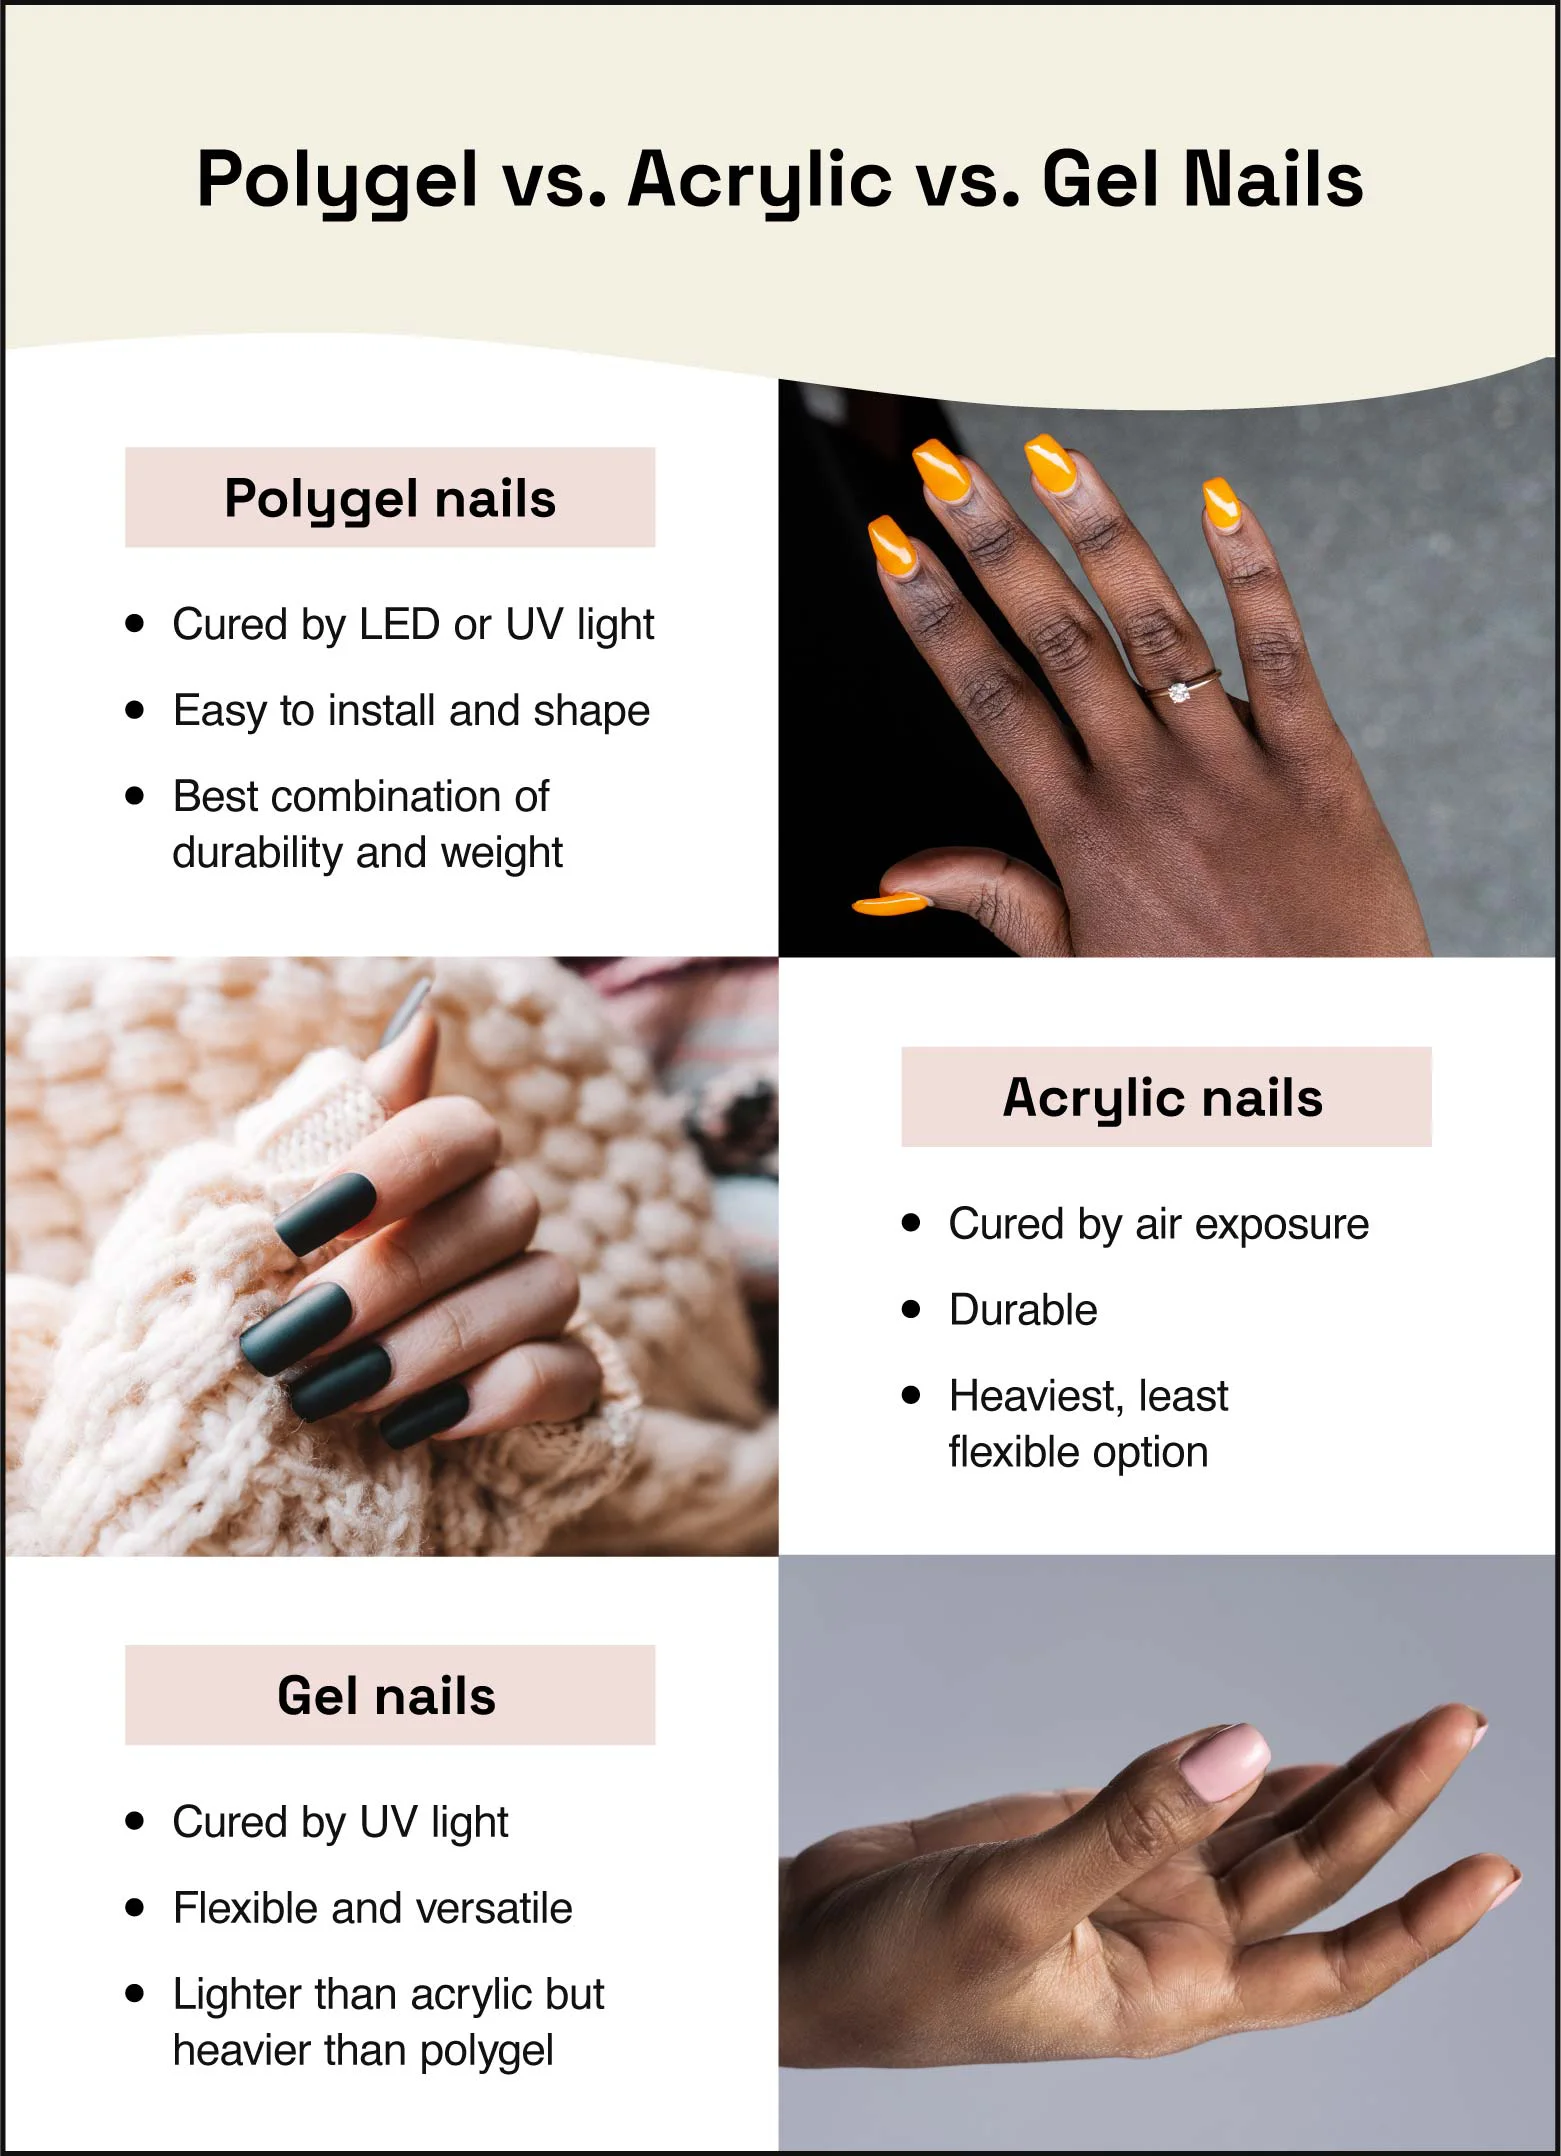 Examples of a polygel, acrylic, and gel manicure with text describing what makes them different.